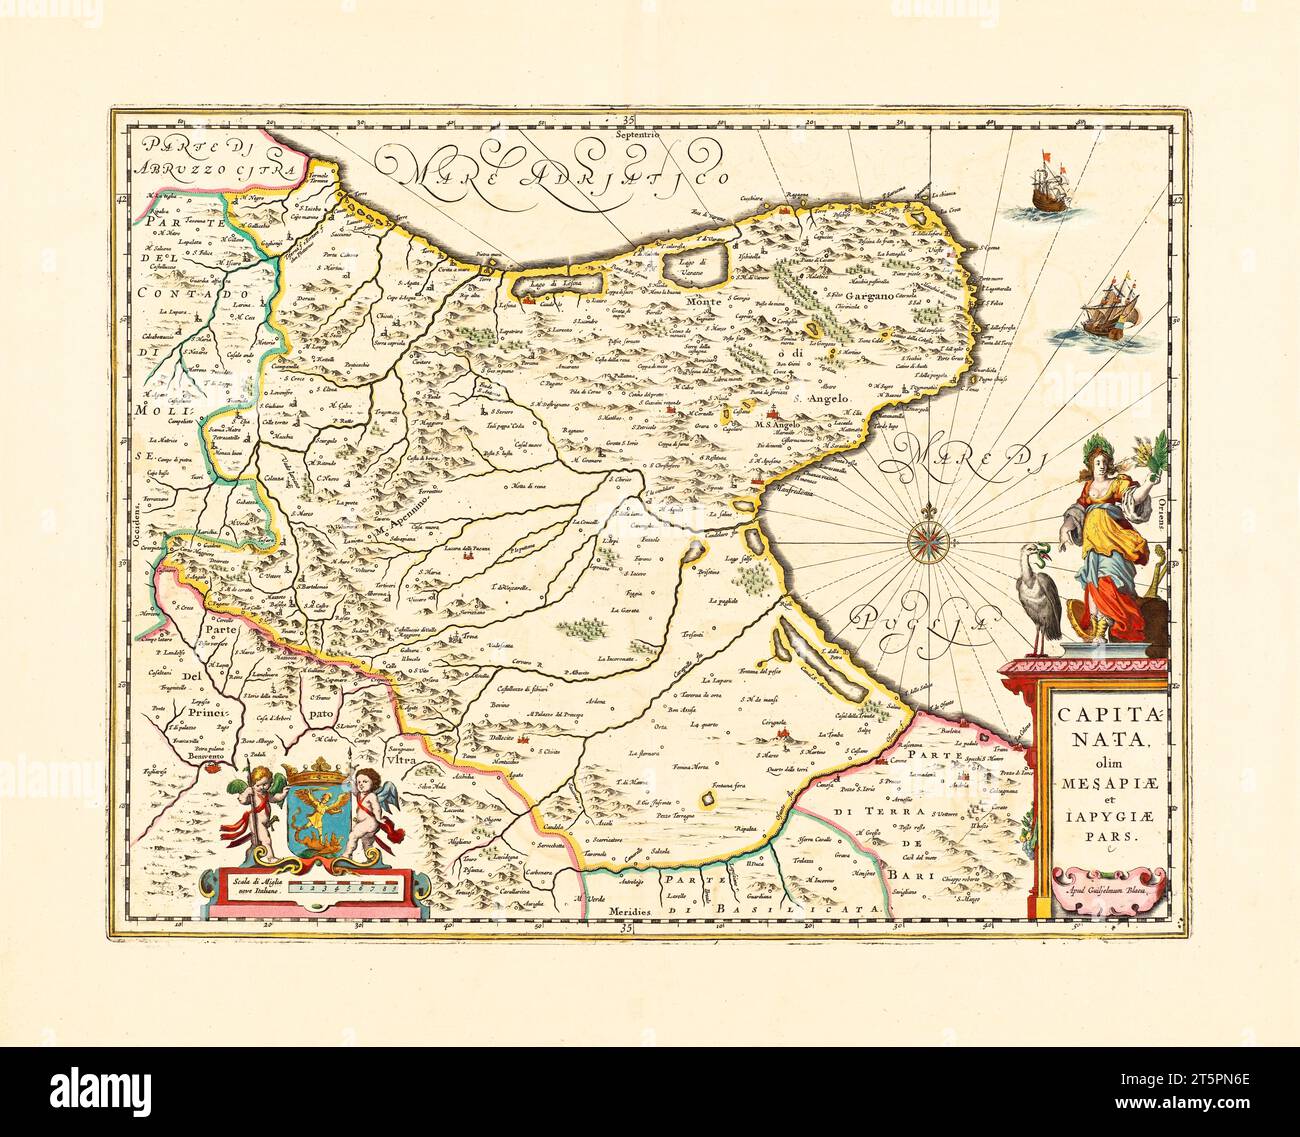 Old map of Capitanata historical region, Italy. By Jansonn, publ. ca. 1647 Stock Photo